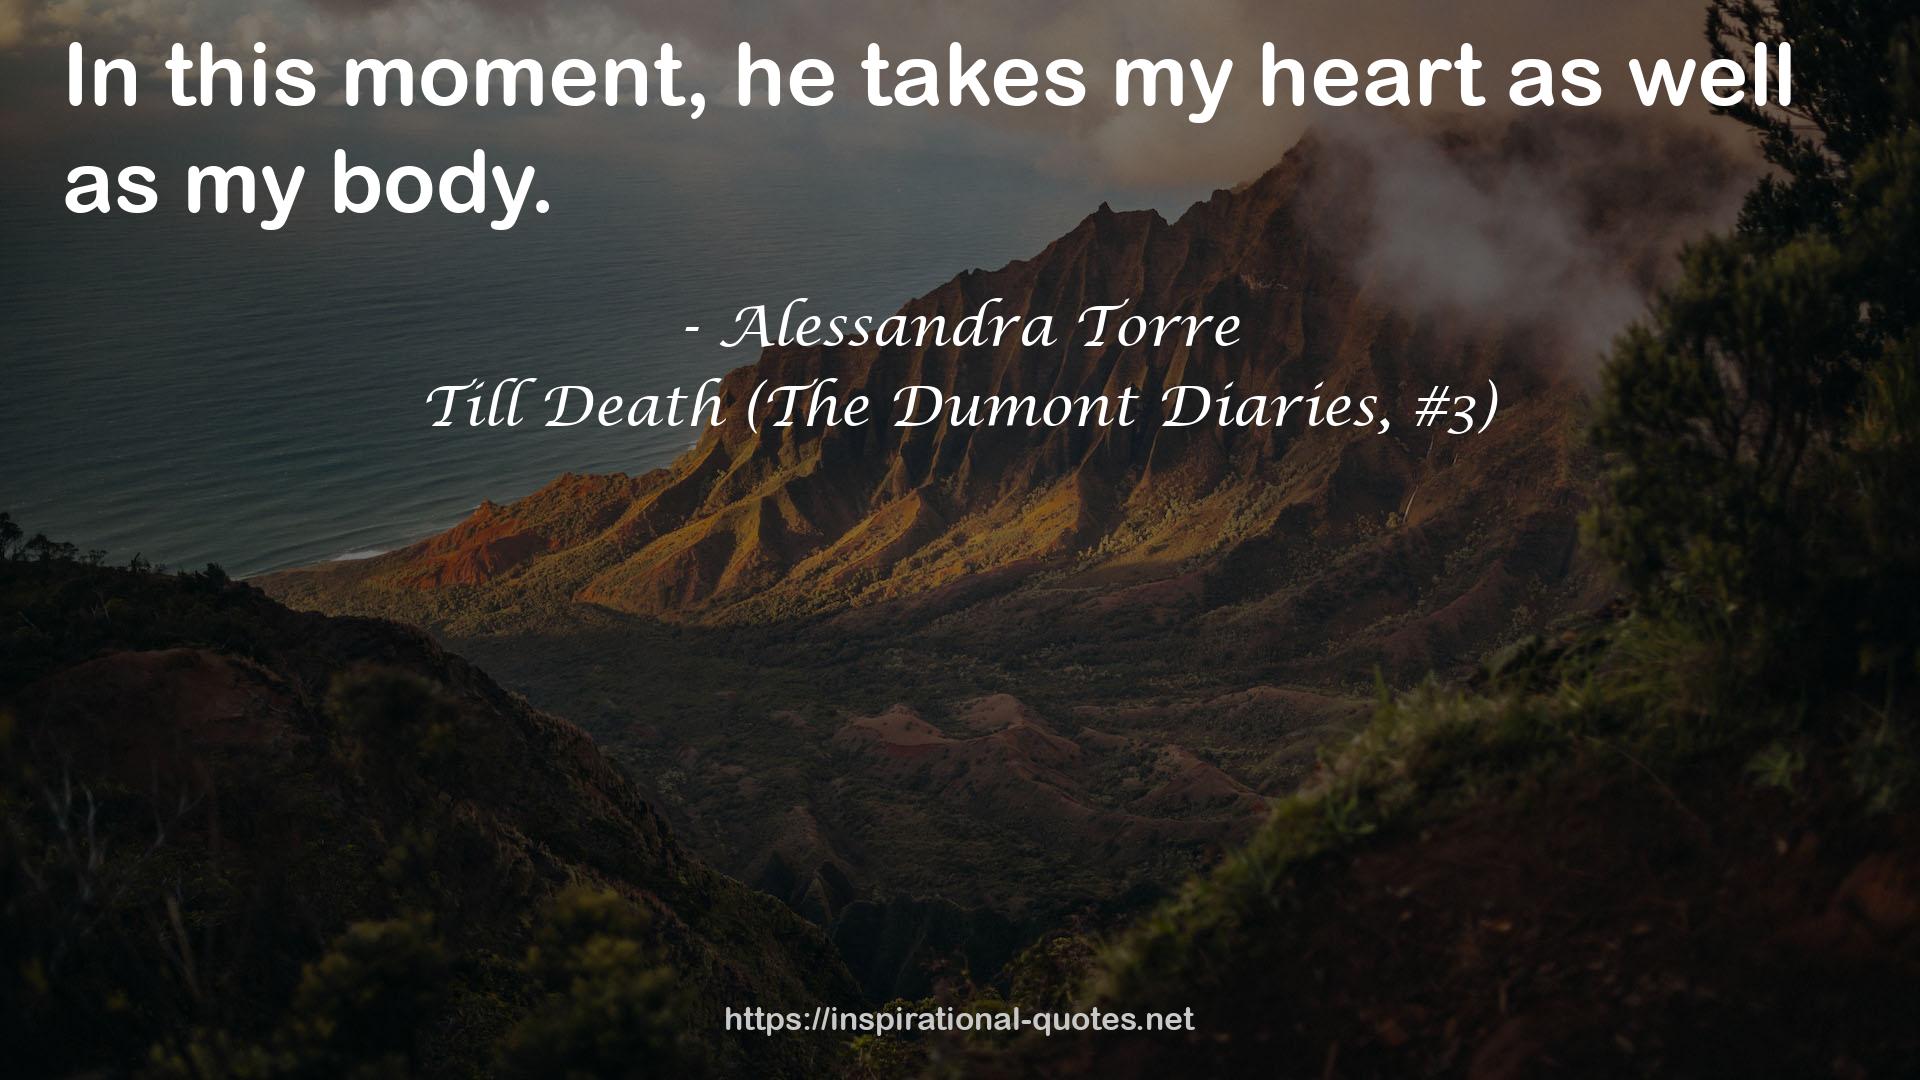 Till Death (The Dumont Diaries, #3) QUOTES